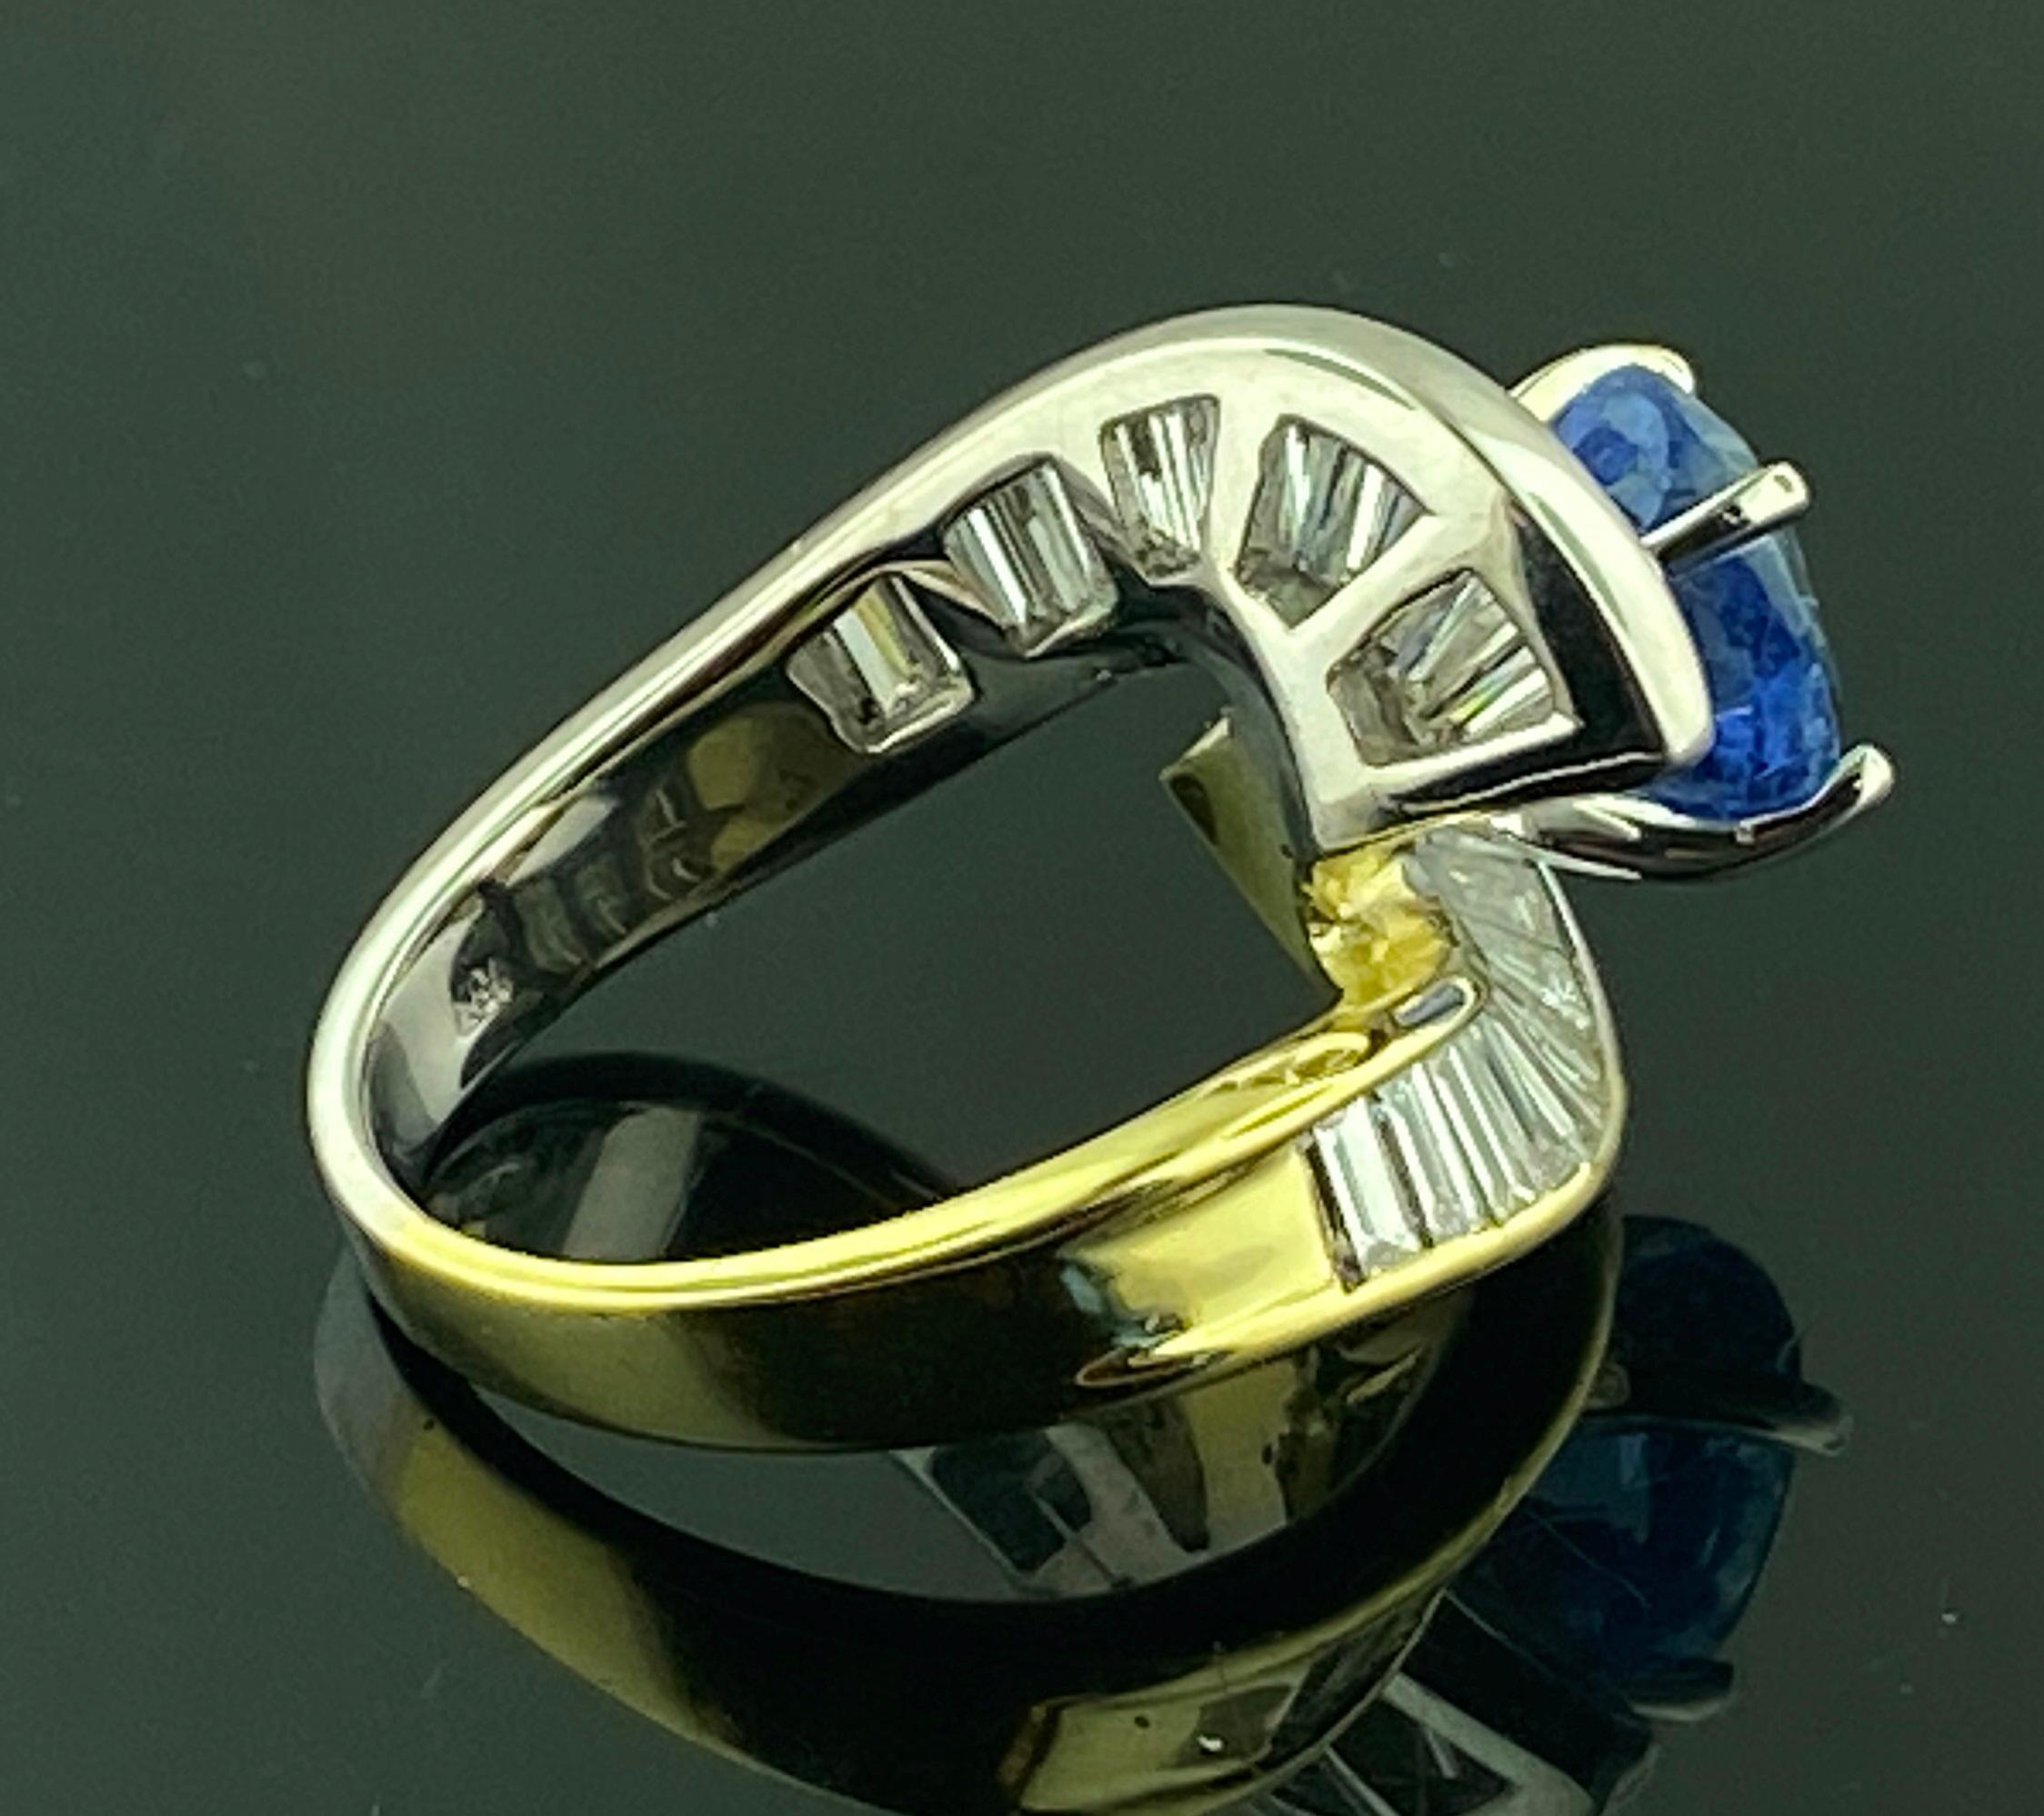 18 KT White & Yellow Gold Ring with a 4.03 Ct Blue Sapphire and 2.0 Cts Diamonds 1